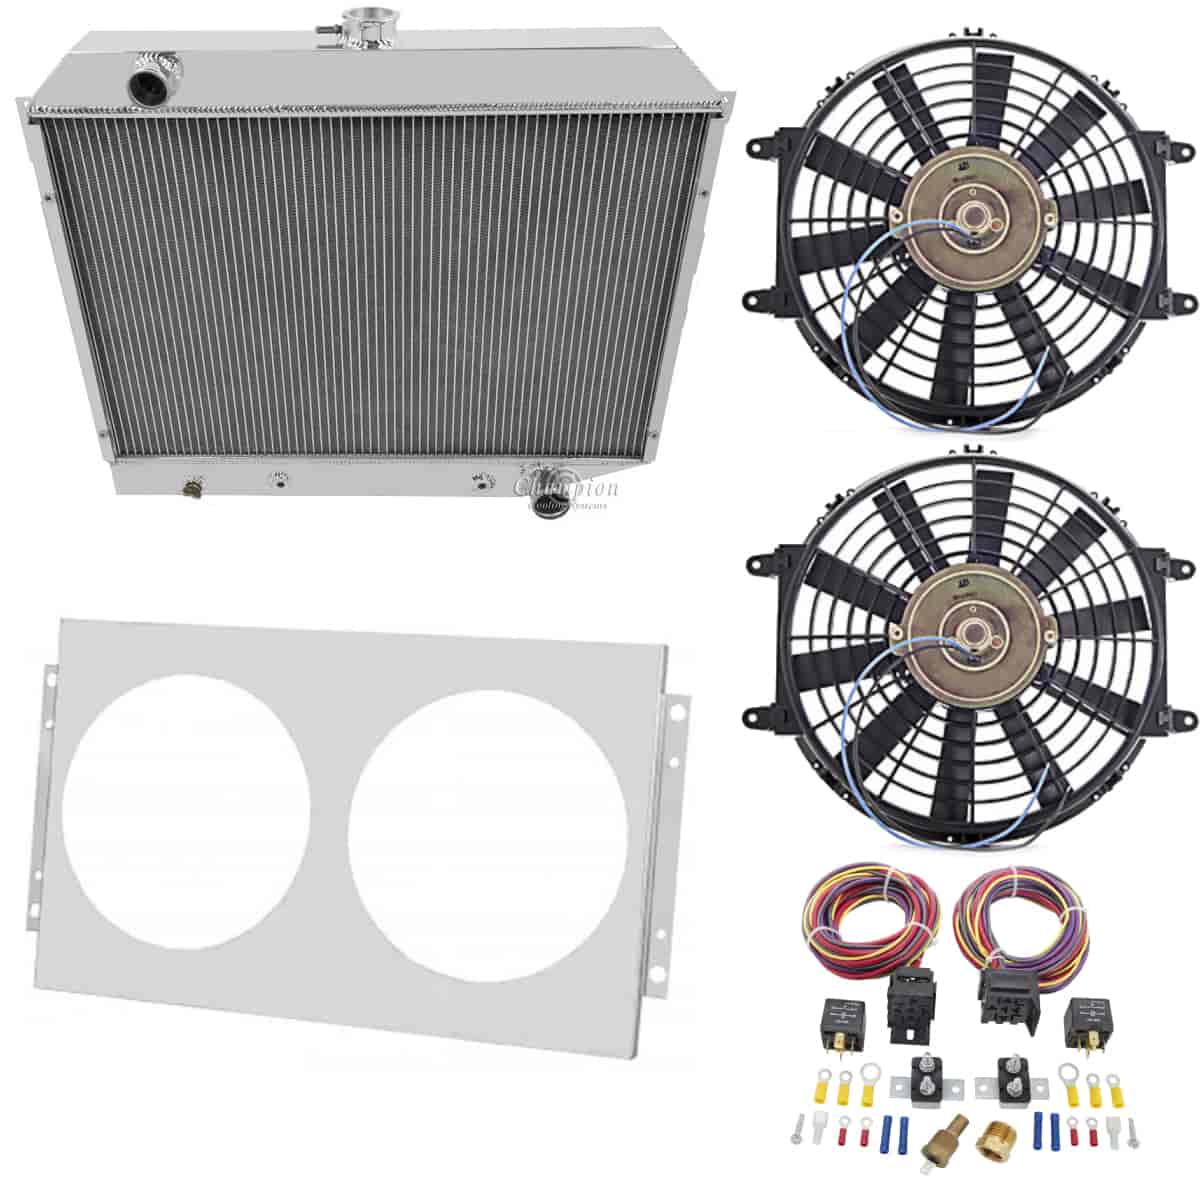 Radiator with Shroud and Fan Control Kit 1970-1974